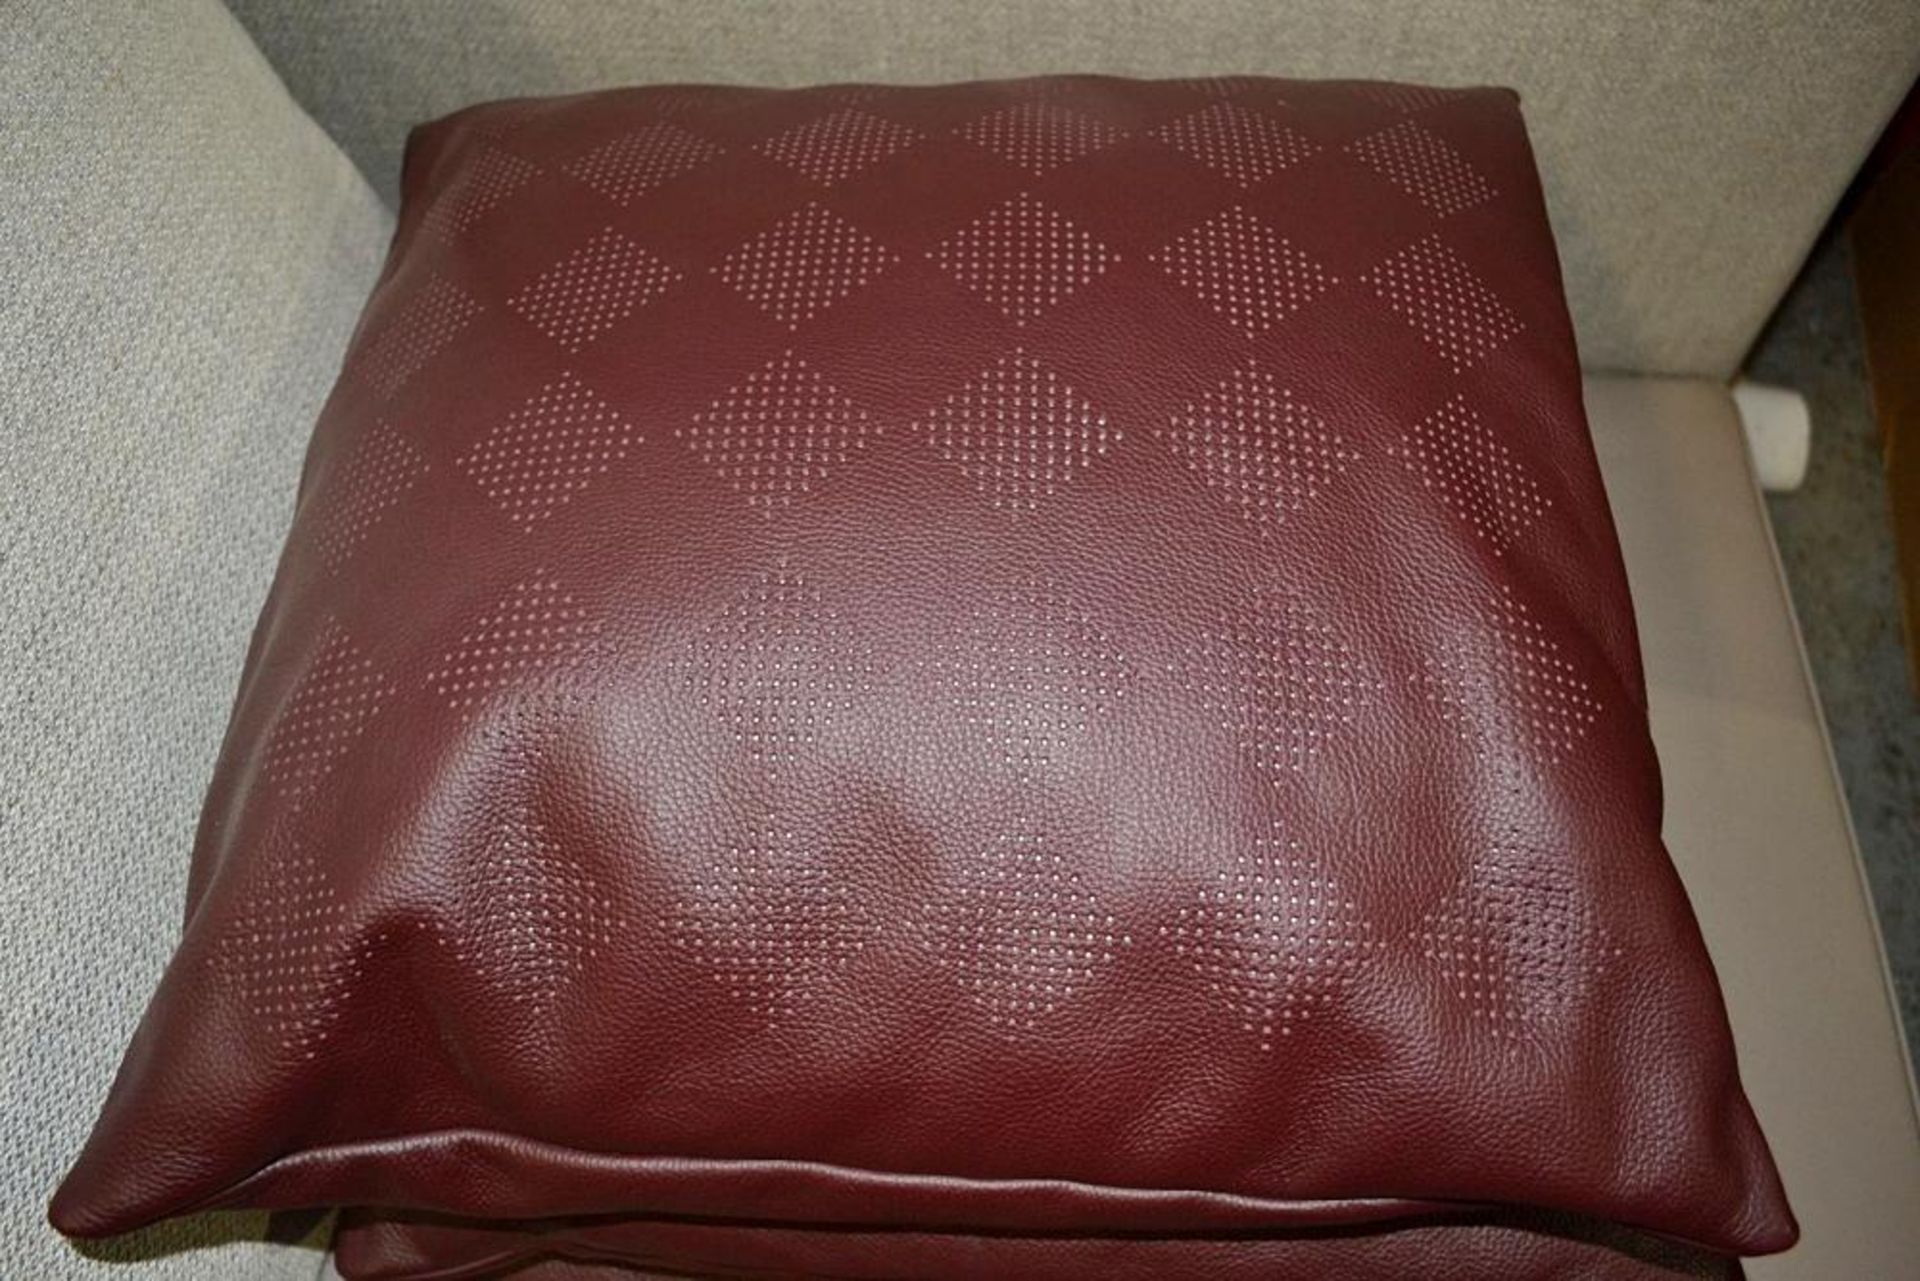 3 x POLTRONA FRAU Goose Down Scatter Cushions In A Burgundy Leather With A Diamond Motif - Dimension